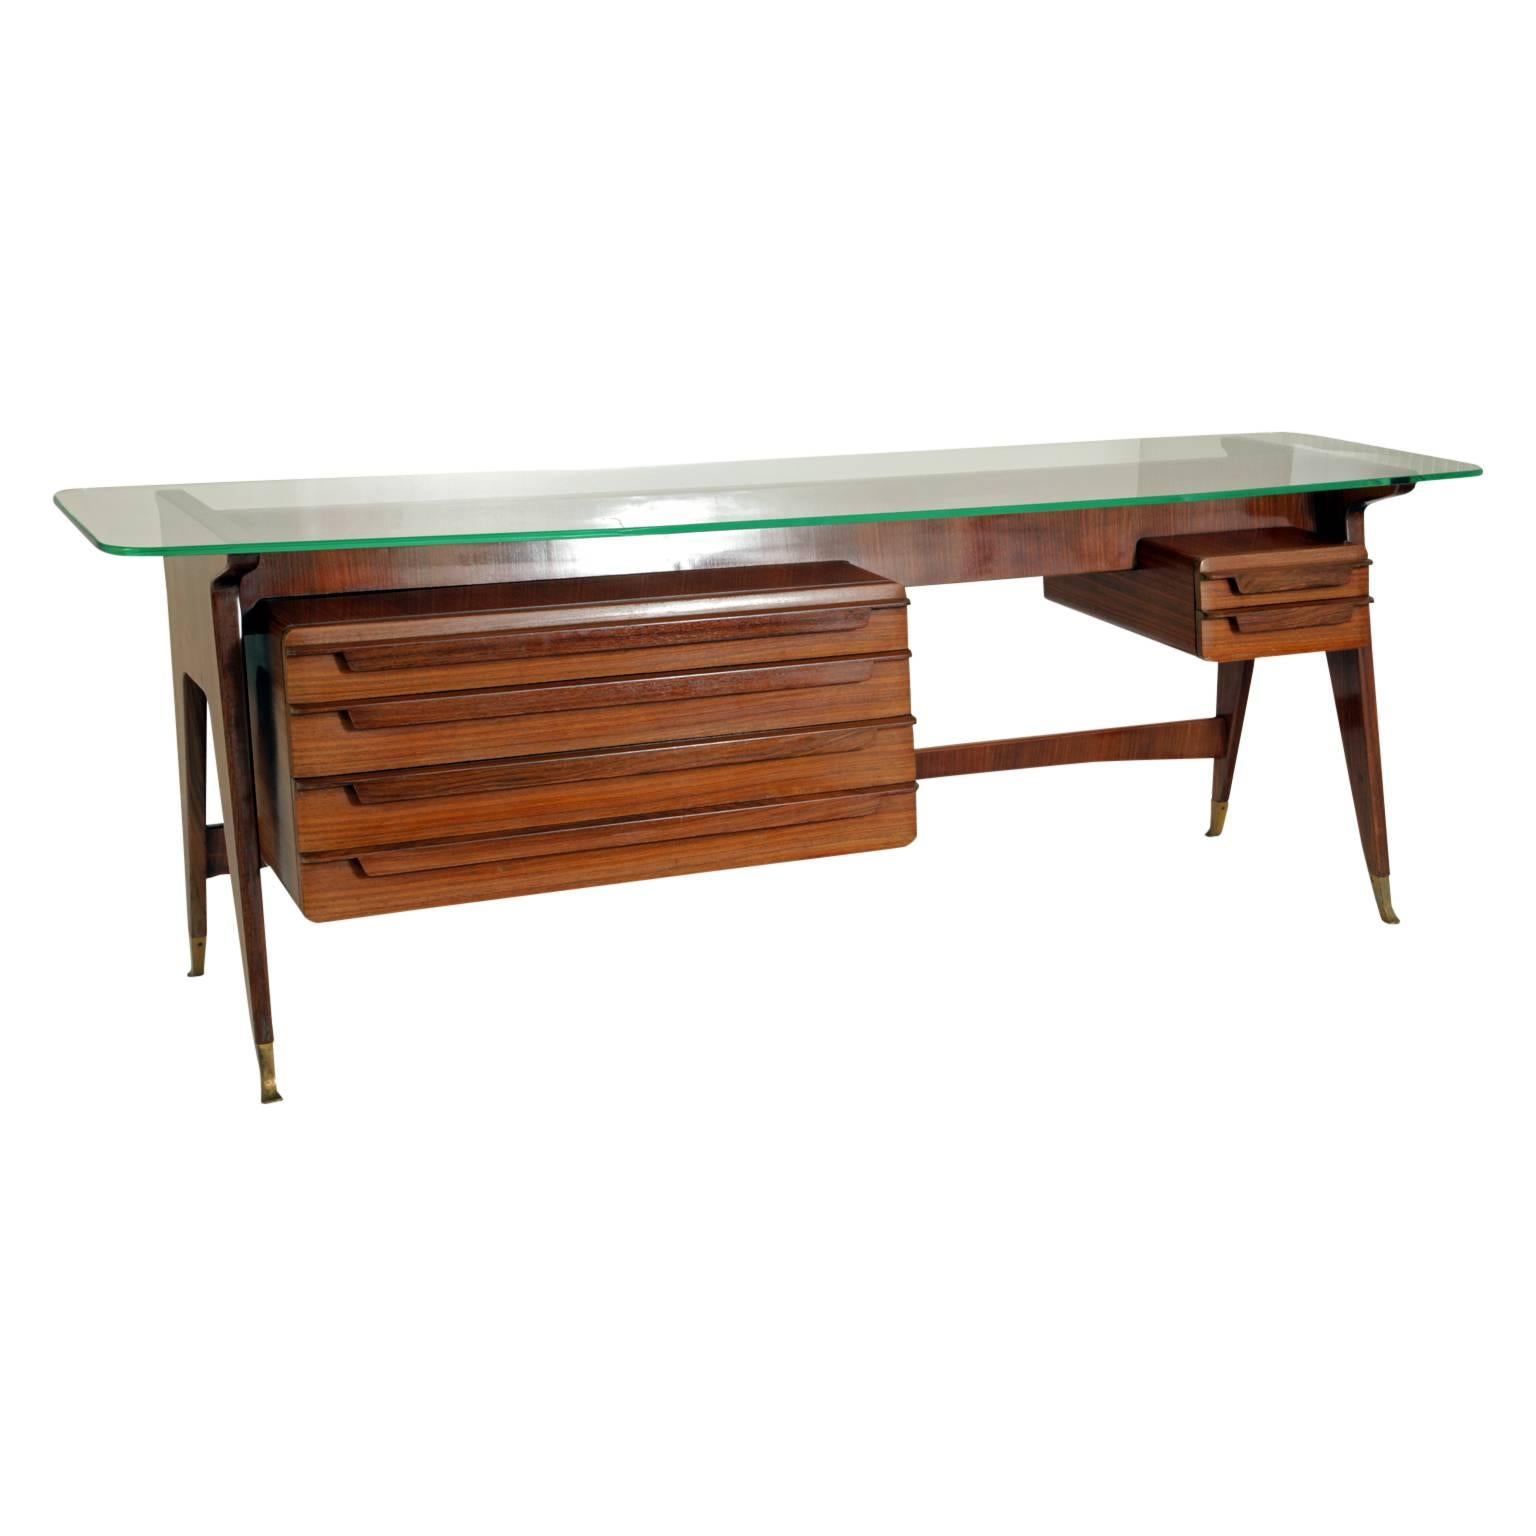 Low desk or dressing table on tapered legs with brass sabots. Beneath the glass tabletop with rounded corners are four broad drawers on the left and two smaller ones on the right.